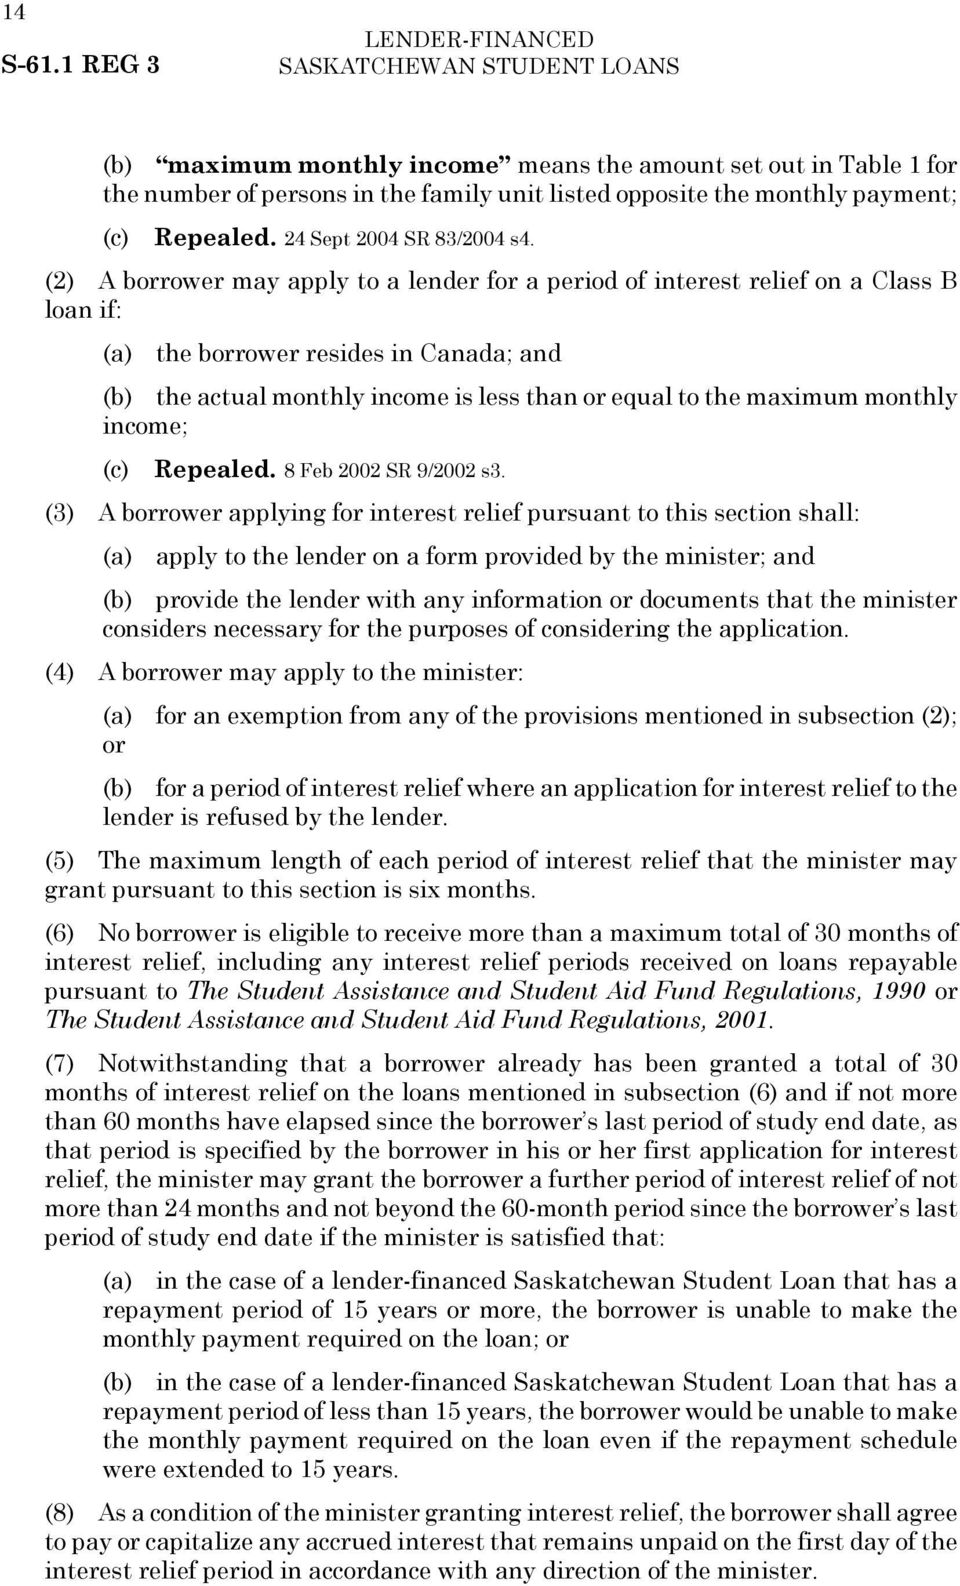 (2) A borrower may apply to a lender for a period of interest relief on a Class B loan if: (a) the borrower resides in Canada; and (b) the actual monthly income is less than or equal to the maximum